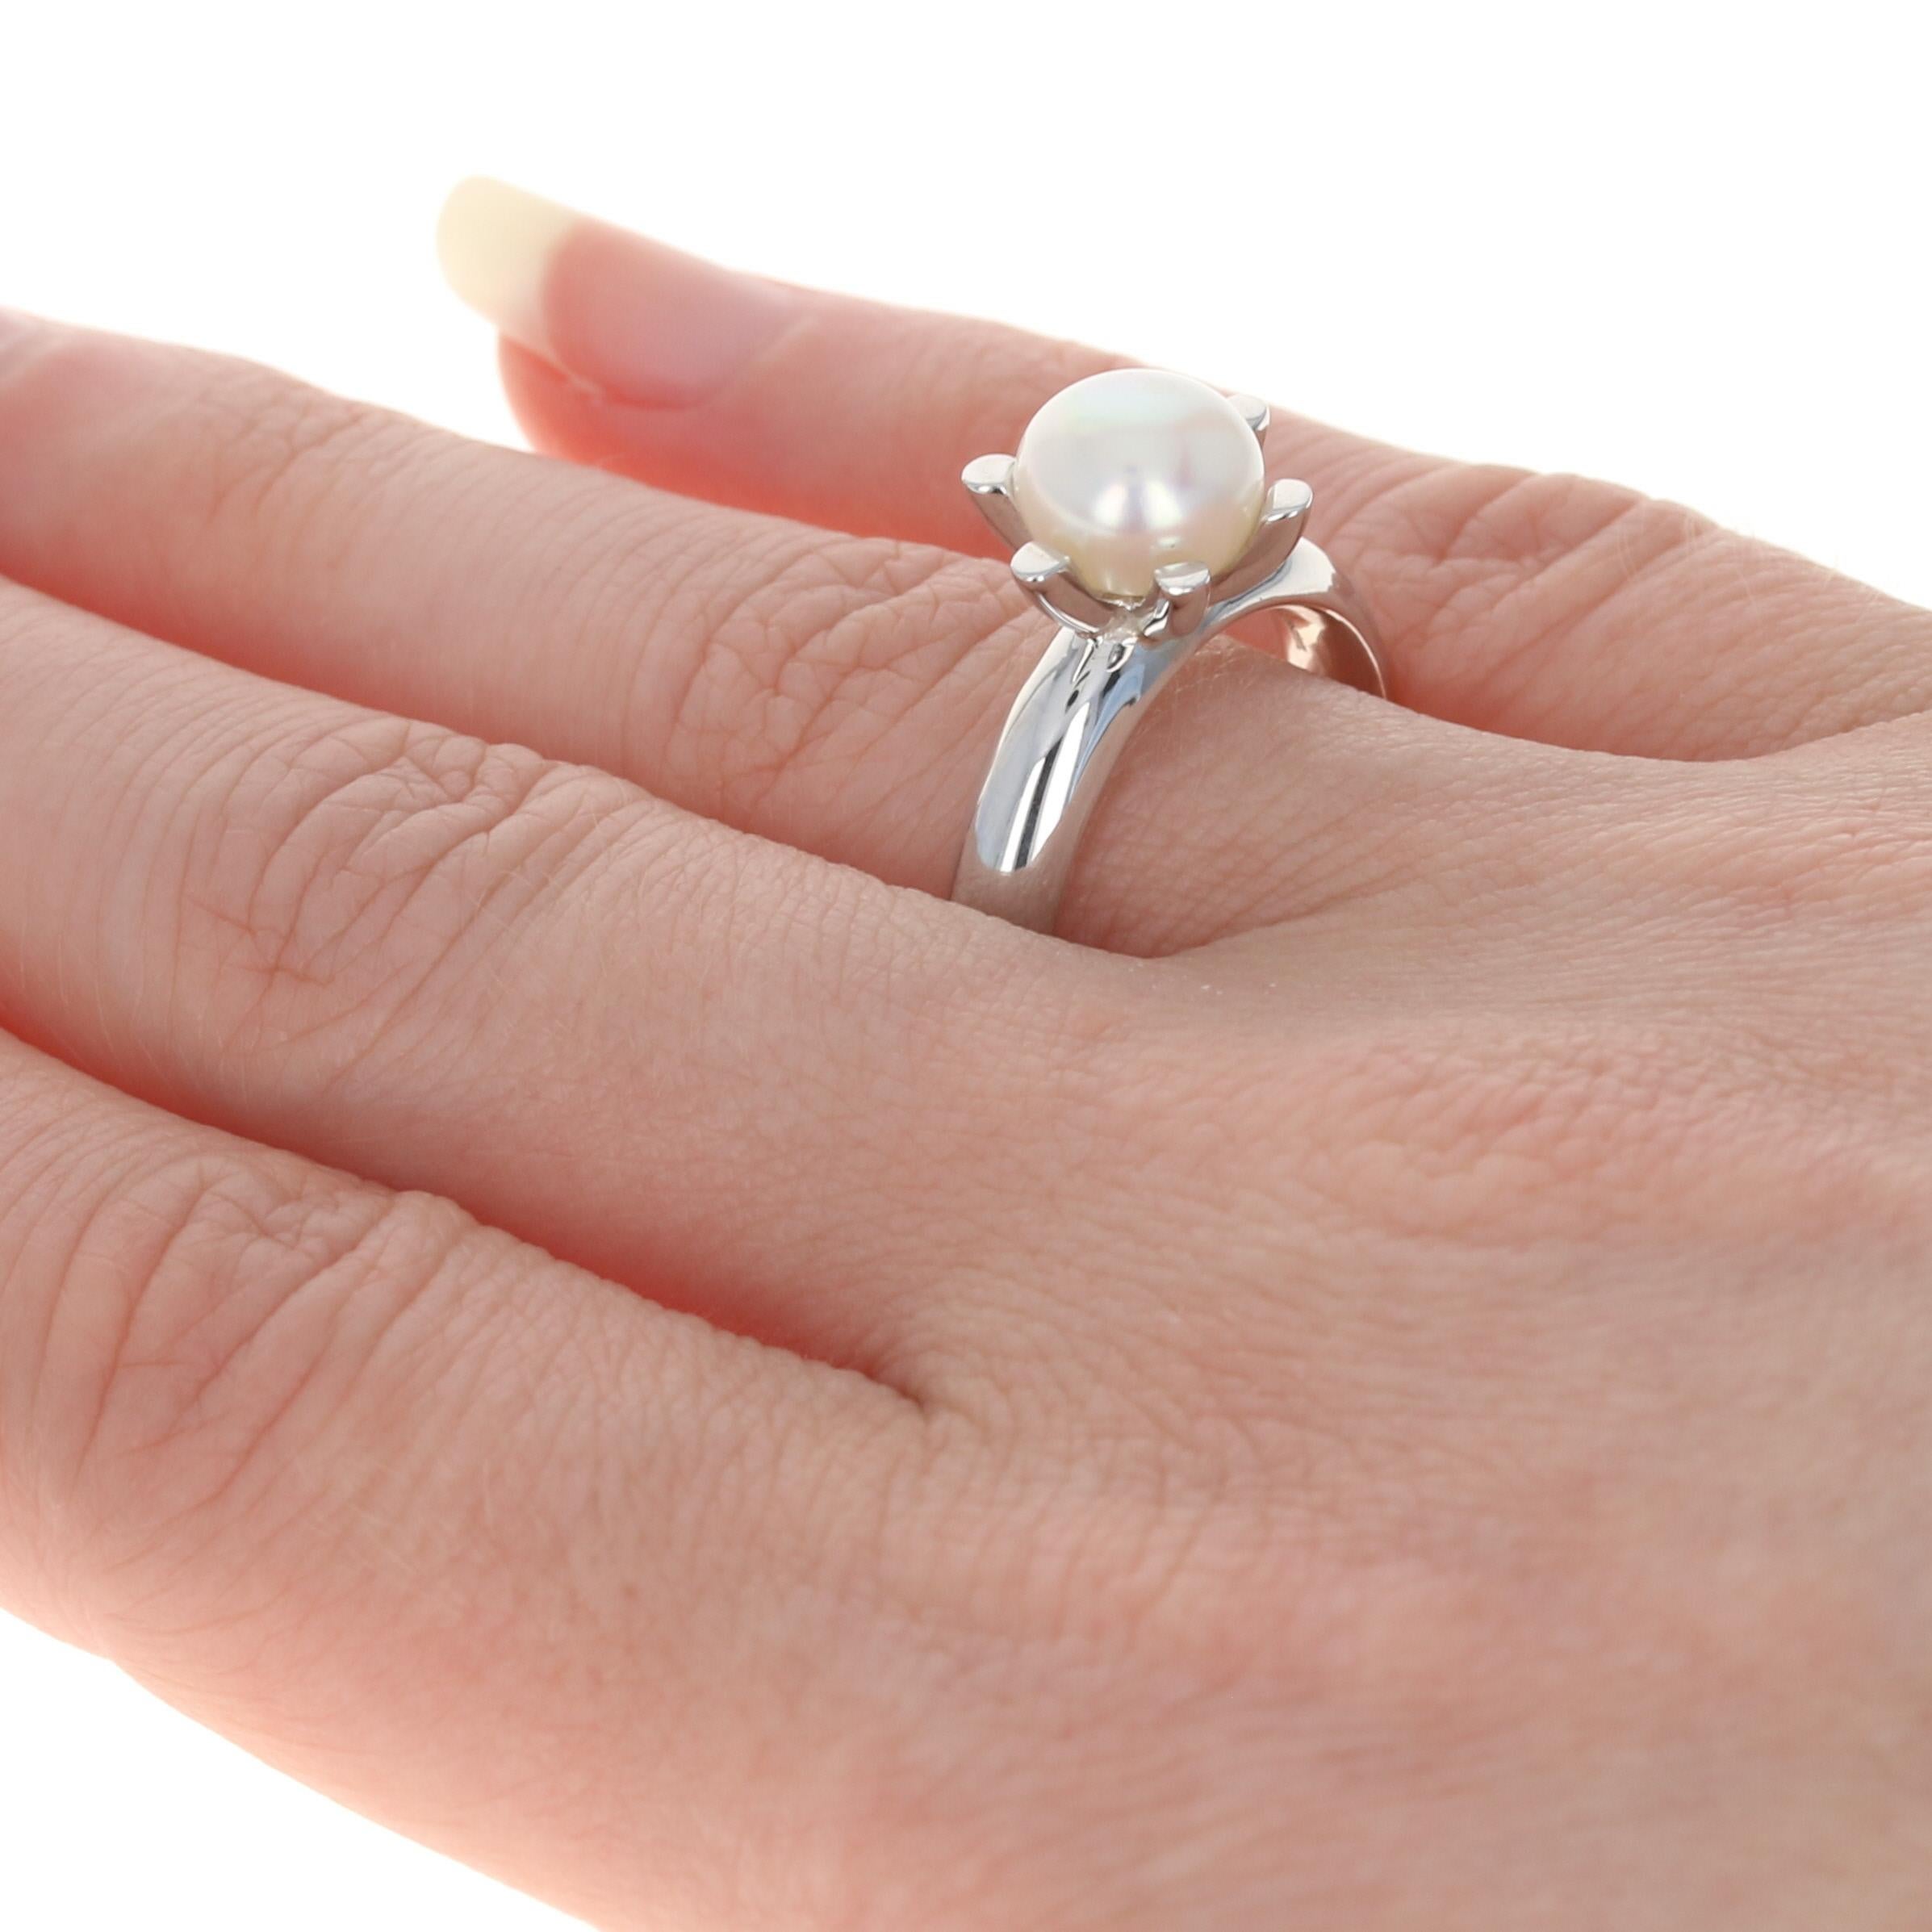 For Sale:  New Bastian Inverun Ring, Freshwater Pearl Solitaire Sterling Silver 4